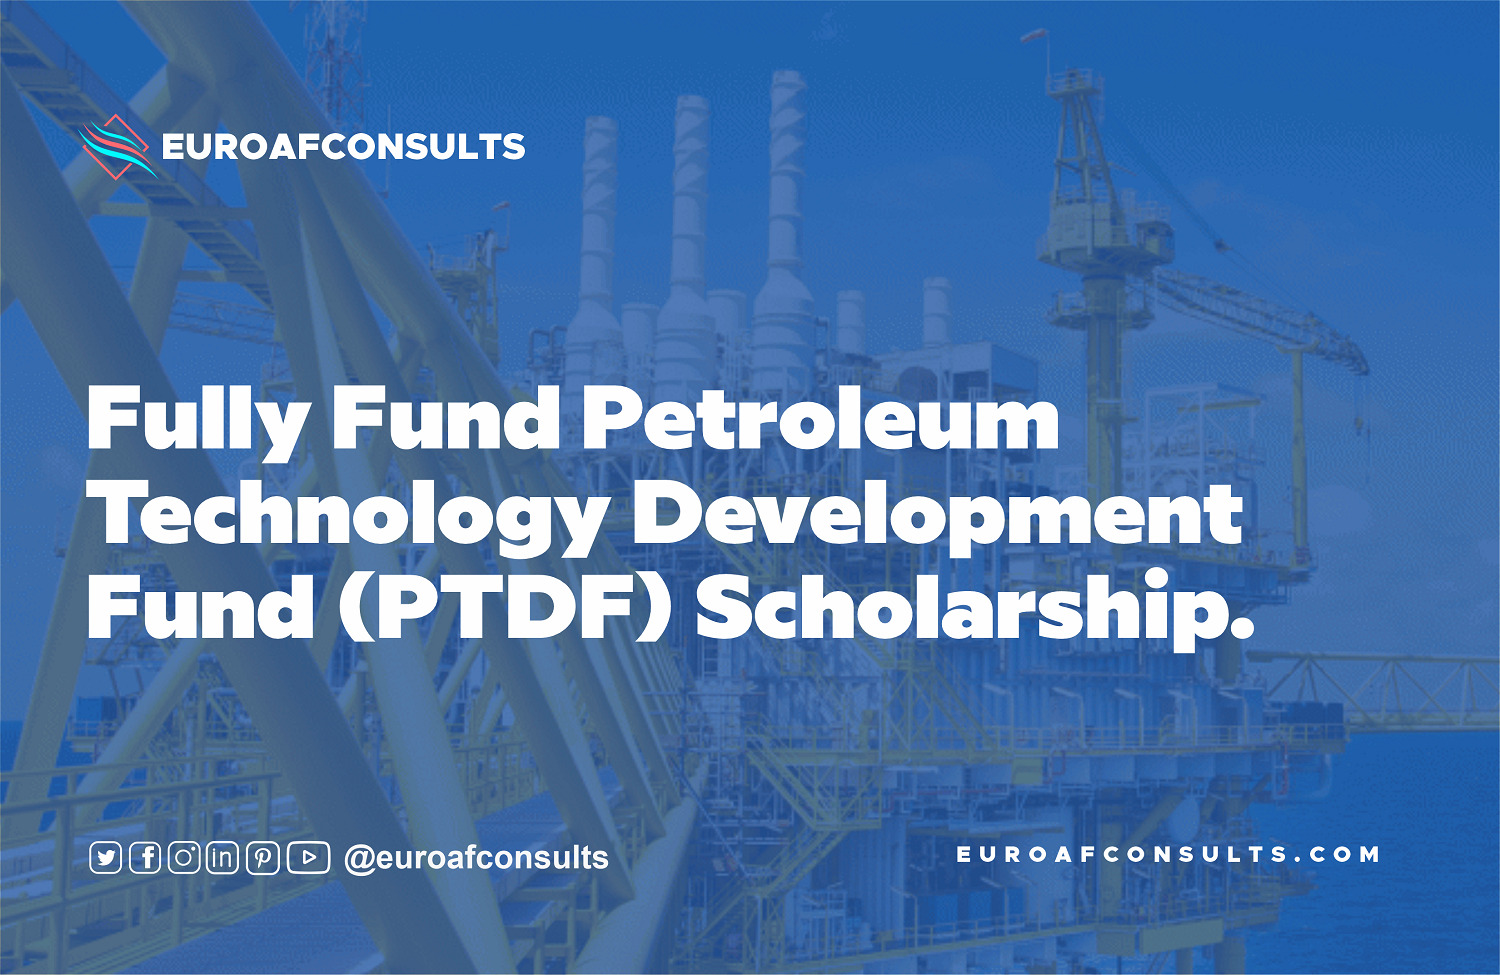 You are currently viewing Fully Fund Petroleum Technology Development Fund (PTDF) Scholarship.